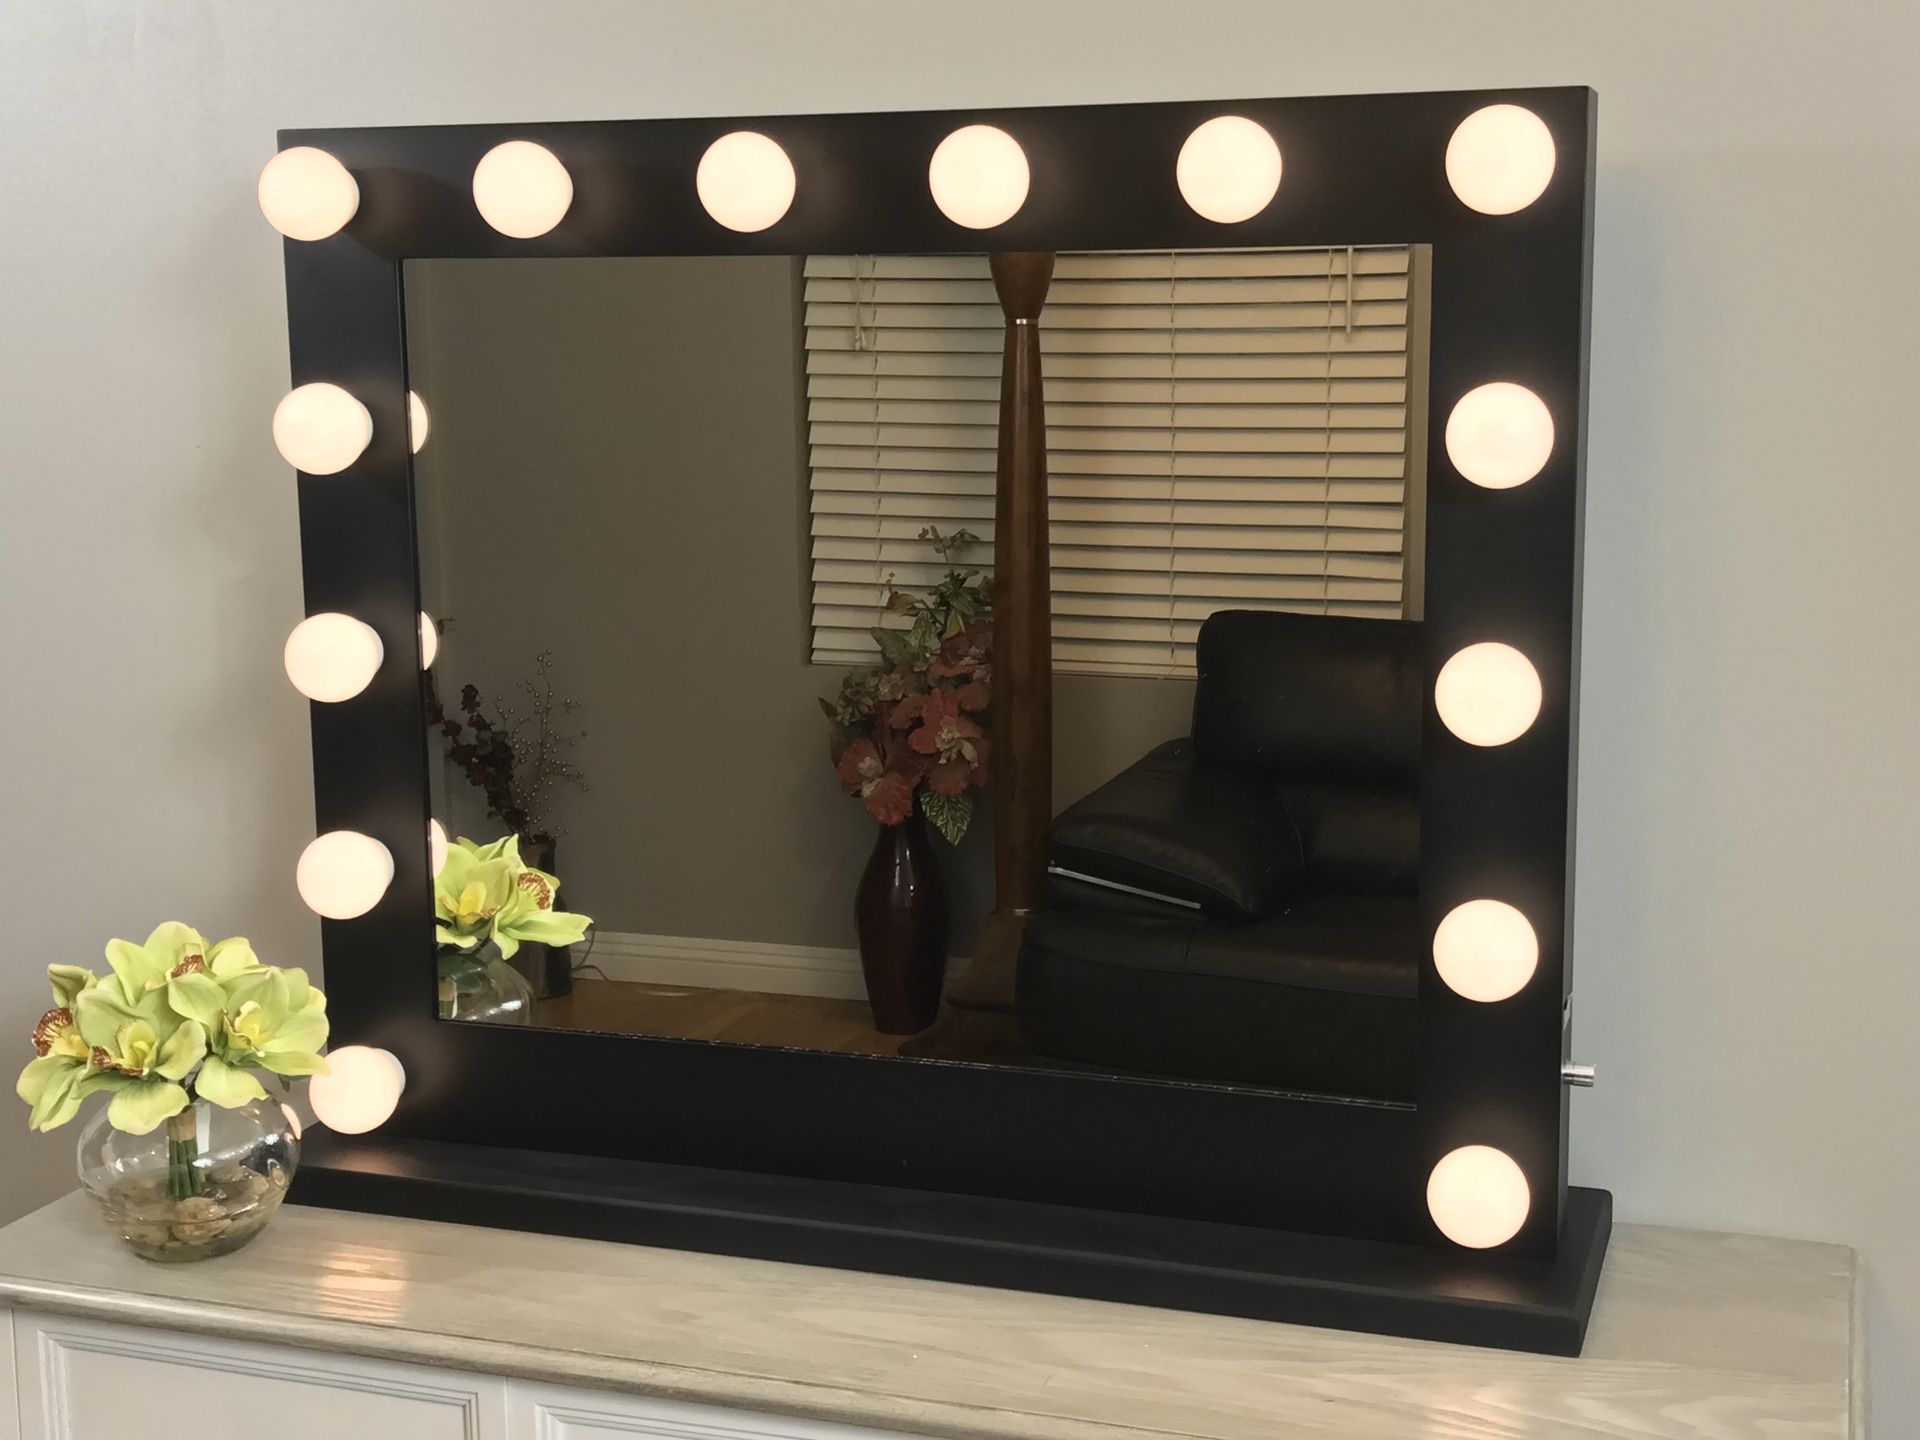 Large Hollywood Vanity Mirror 32 x 26 with 14 LED Lights (included)